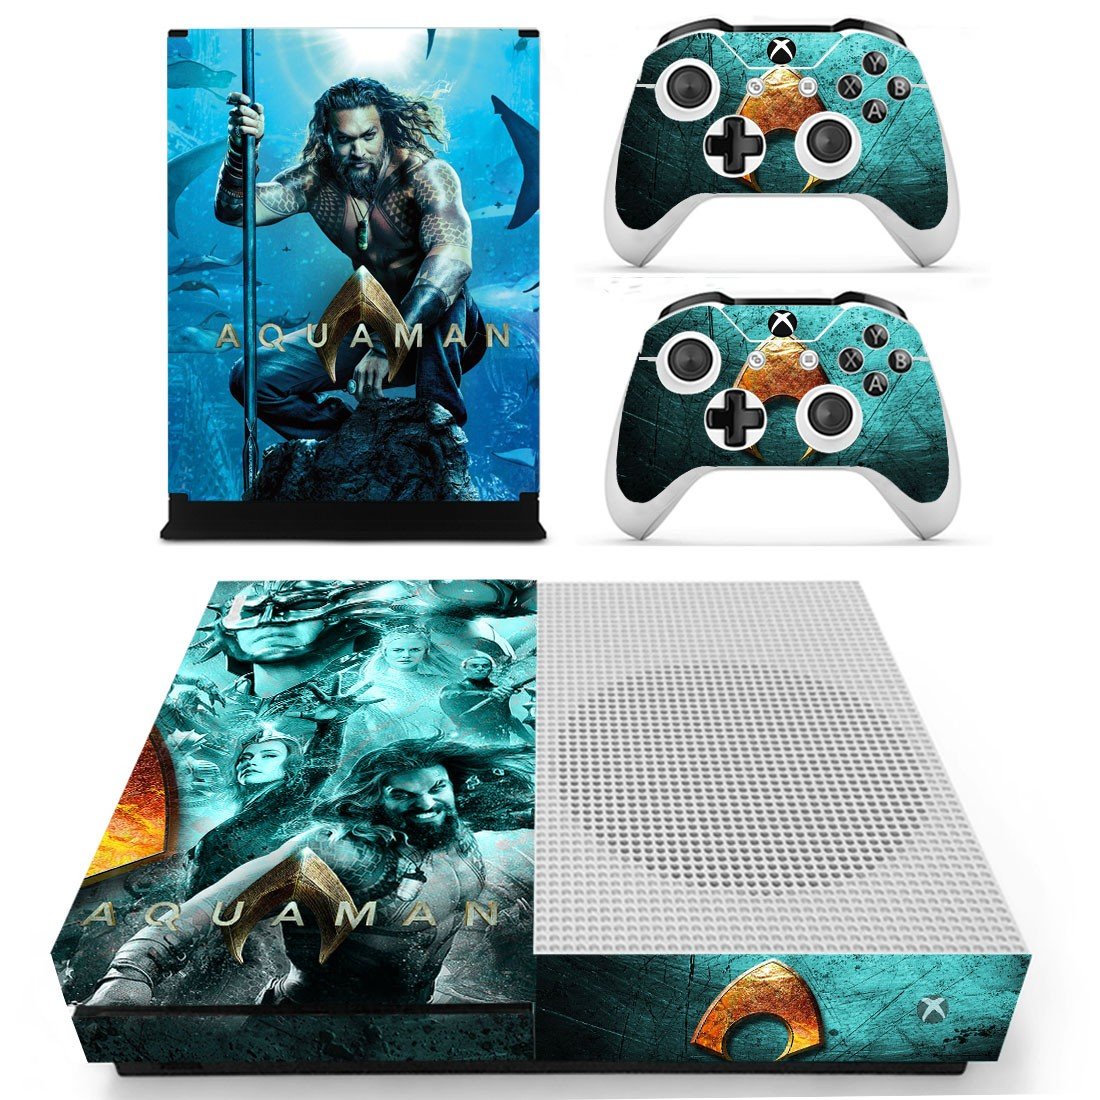 AquaMan Cover For Xbox One S